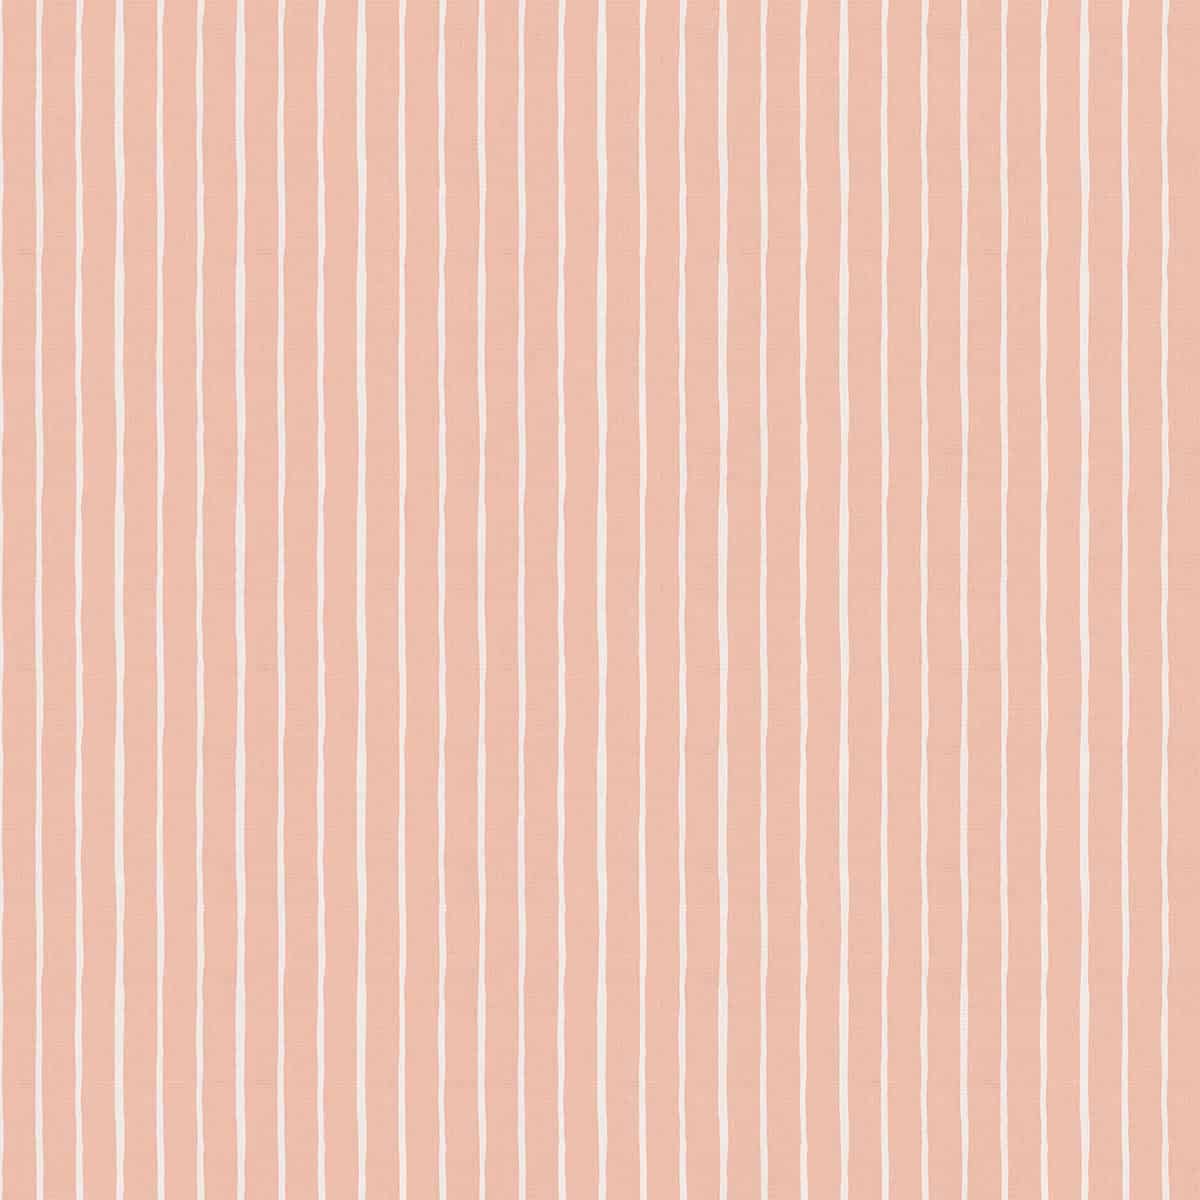 Stripes Repeat Pattern with Fabric Texture, Wallpaper for Rooms, Peach